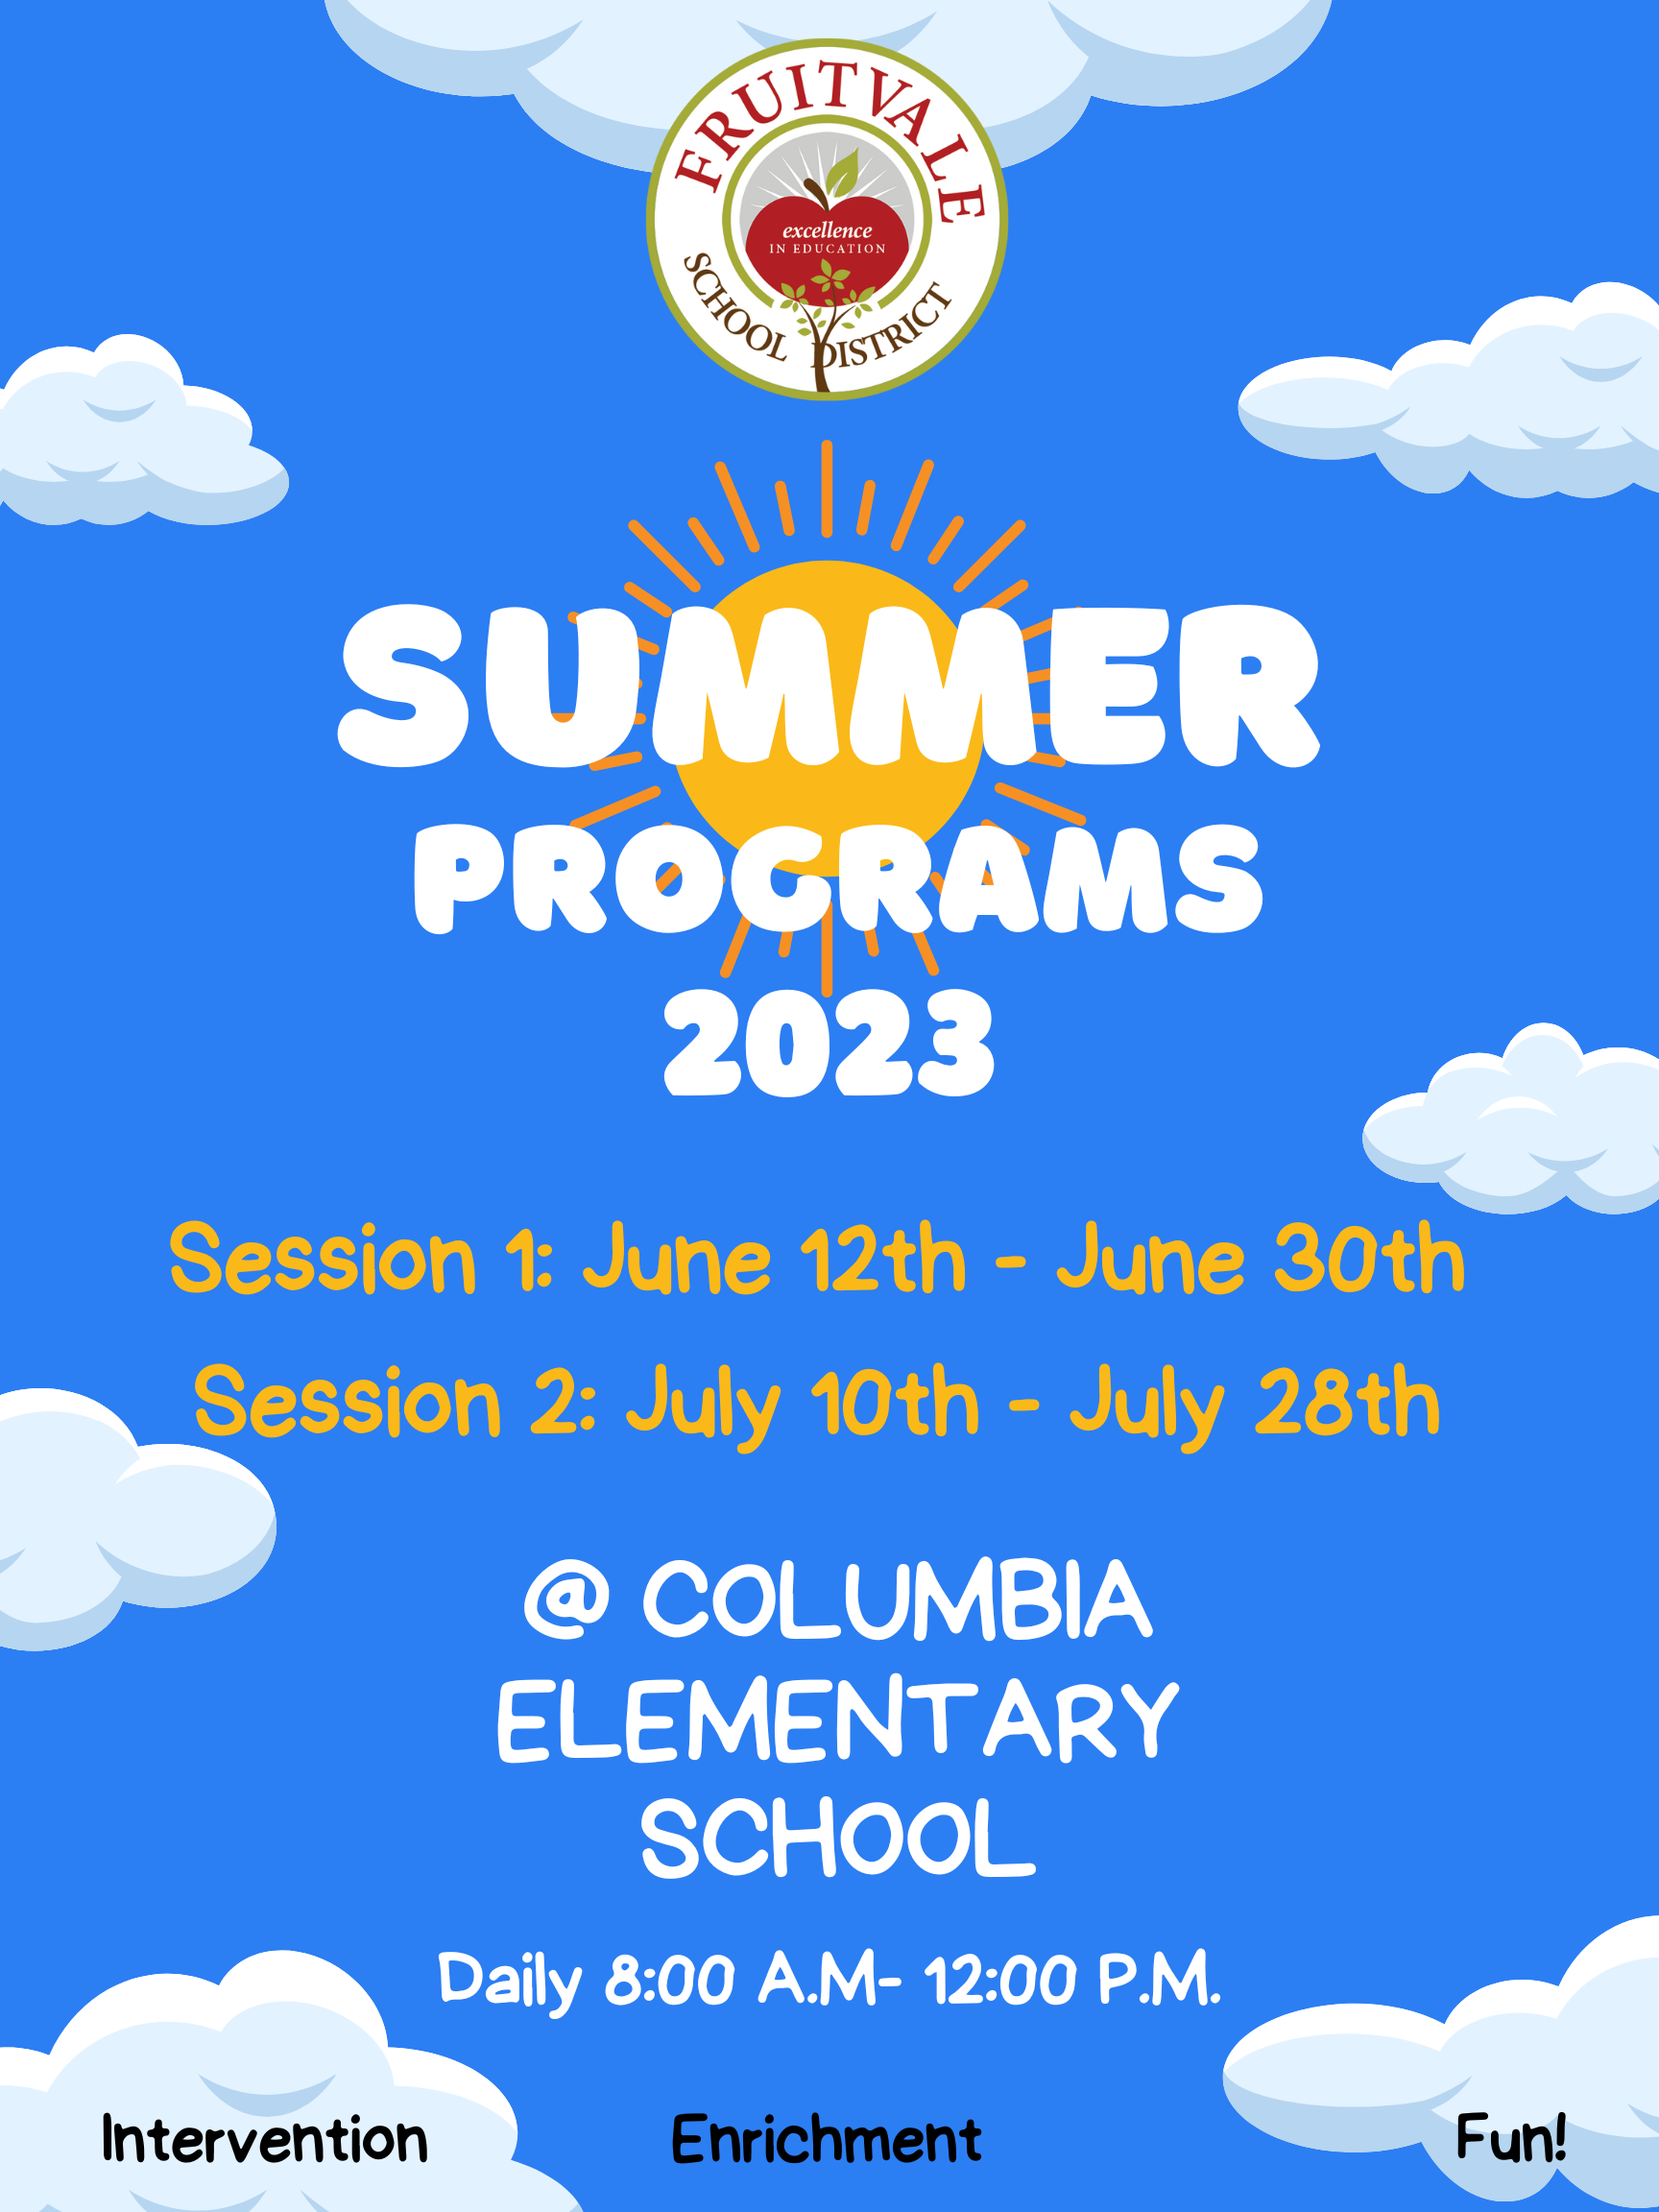 Summer Programs: Session one will be from June 12 to June 30. Session two will be from July 10 to July 28. Summer school session is daily from 8:00AM to 12:00 PM with opportunity for extended care. Registration posts were sent out via Parent Square.